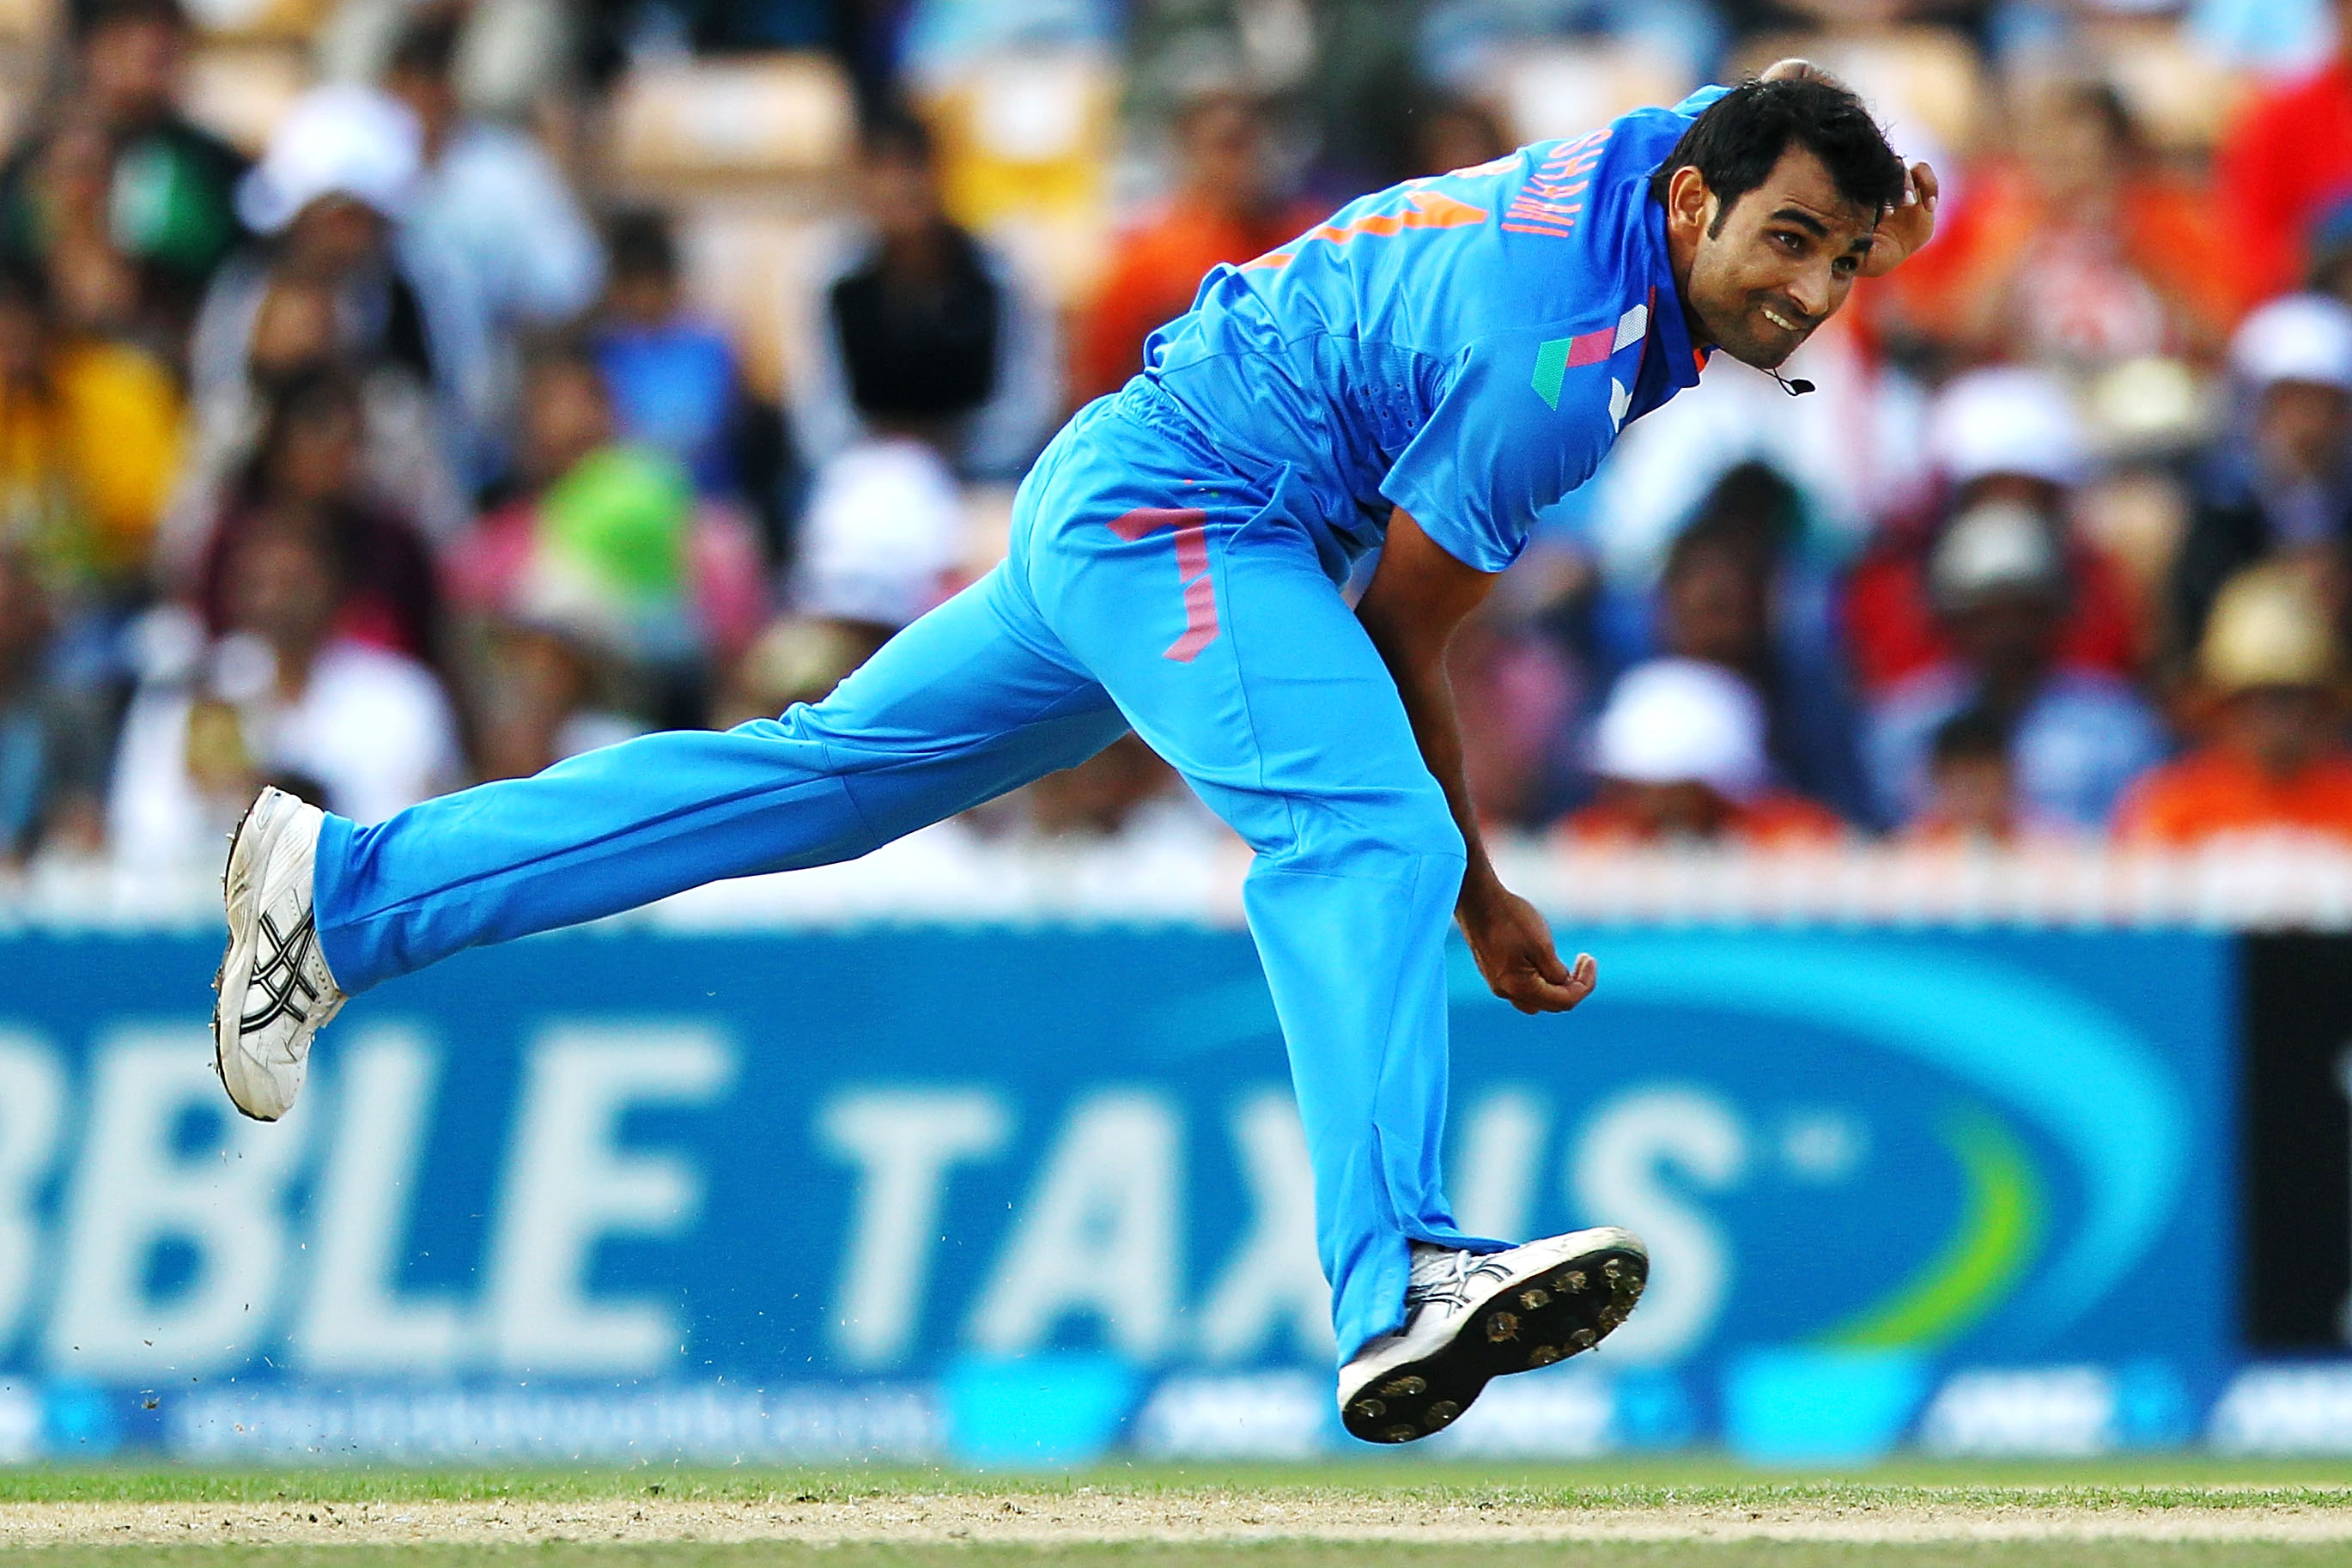 Will give my best in Champions Trophy: Shami